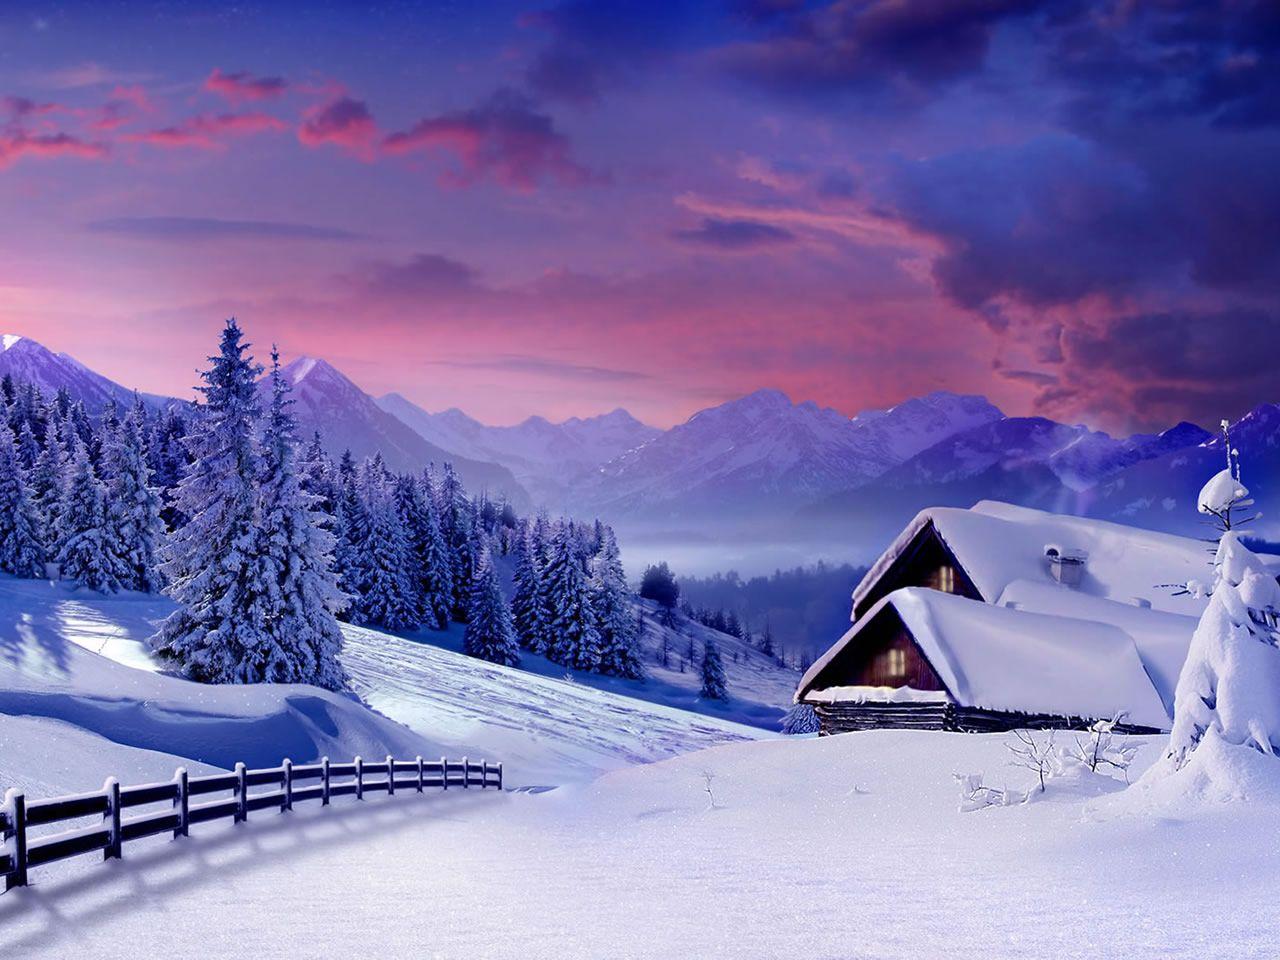 Pink Sunset Wallpaper Winter Cabins Fence Pines Purple Sky Snow. Winter landscape, Winter scenery, Winter picture